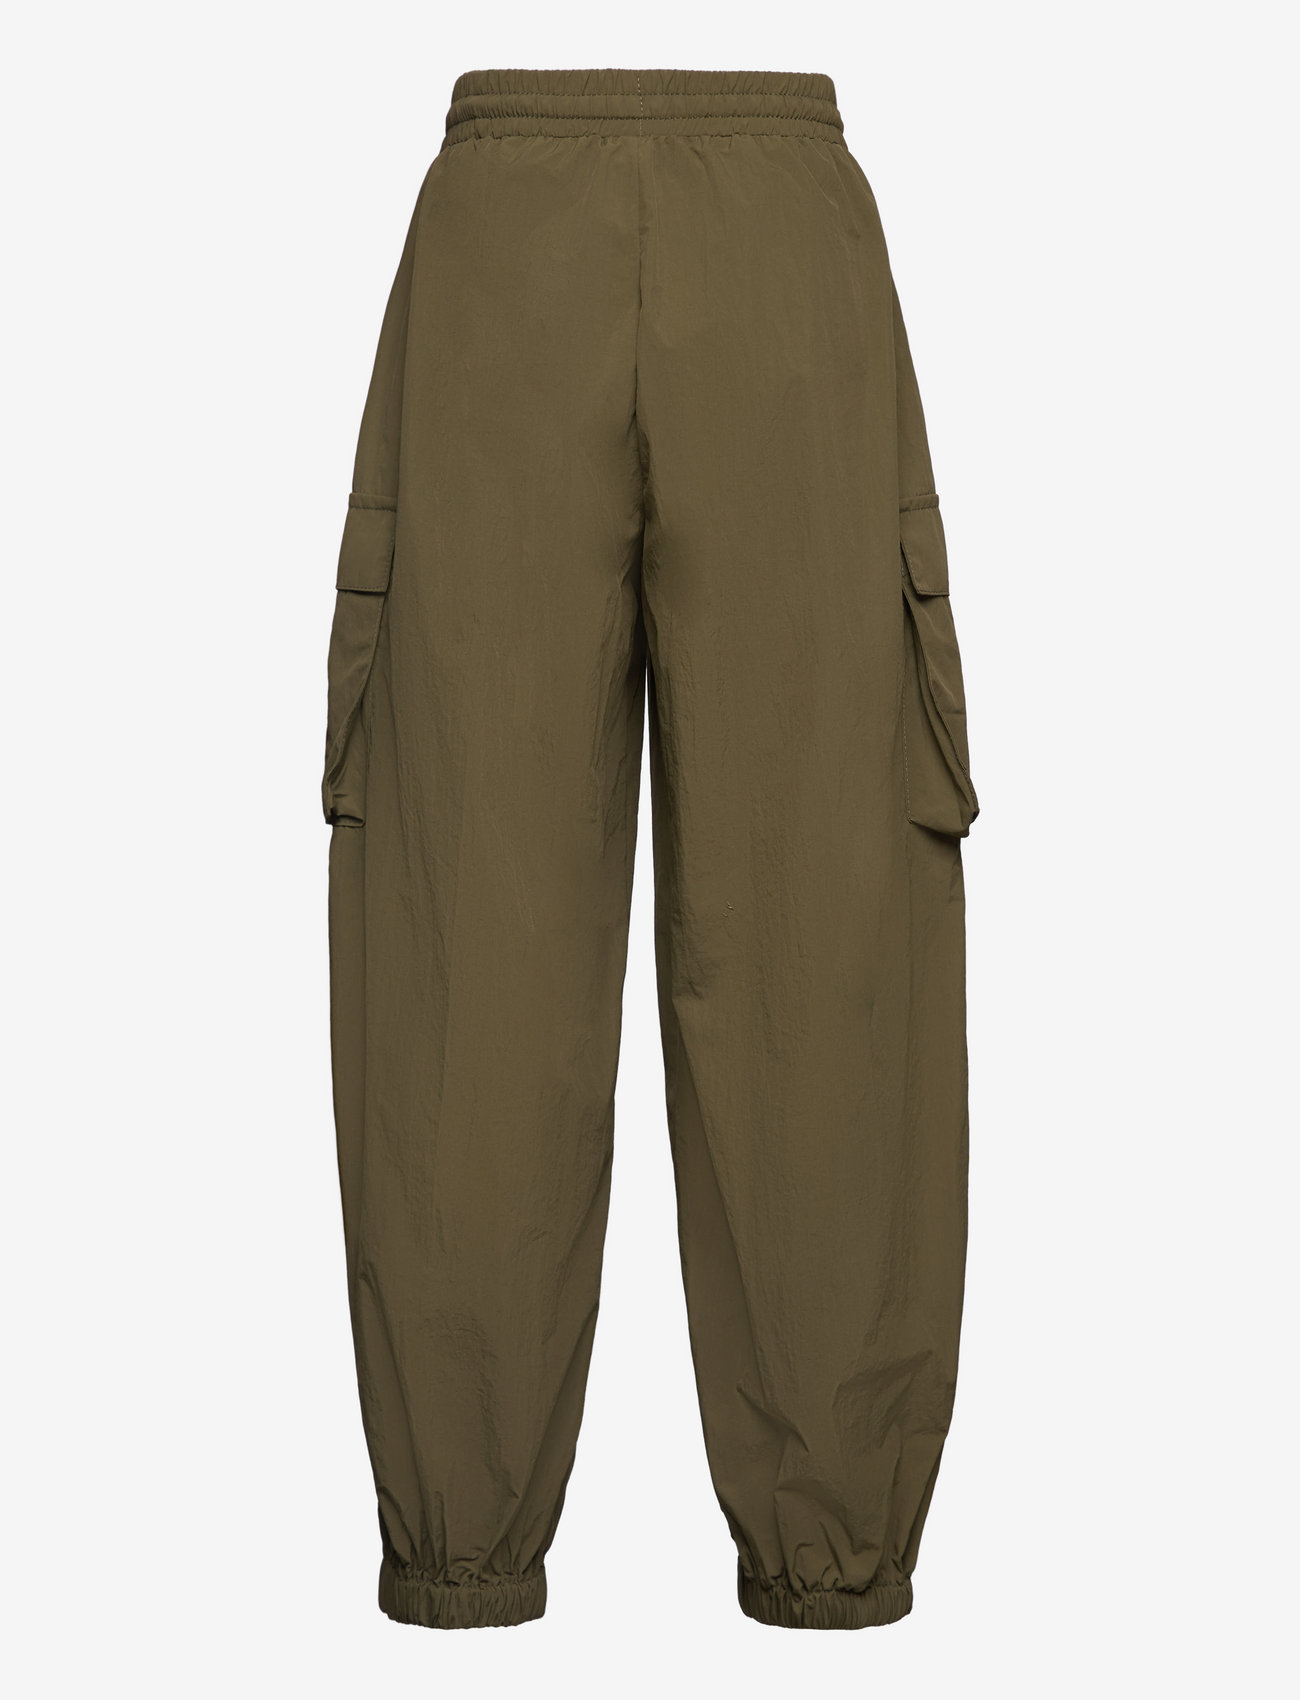 Sofie Schnoor Young - Trousers - trousers - army green - 1